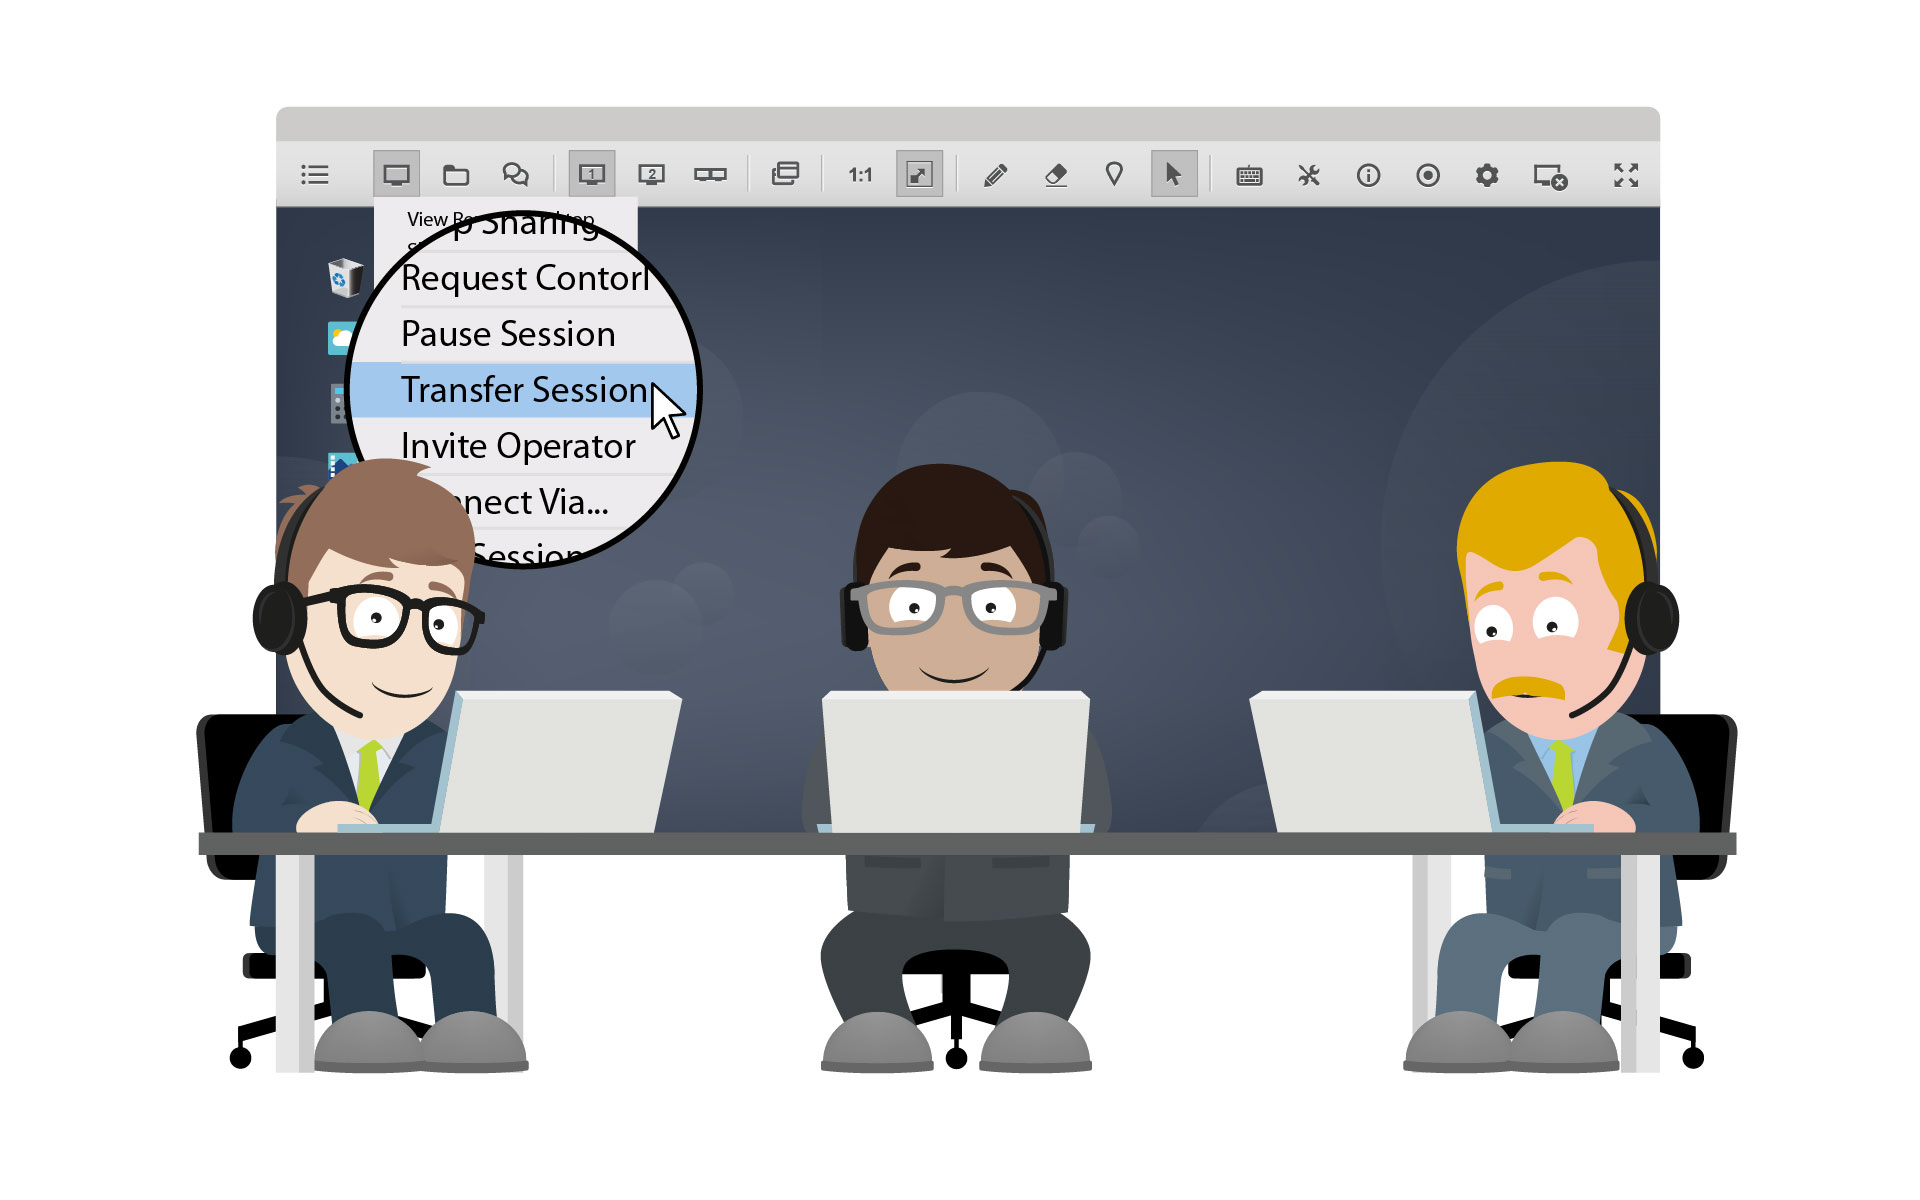 A professional remote support tool allows a team of technicians to efficiently collaborate on a remote computer and work together to solve a challenging technical problem.